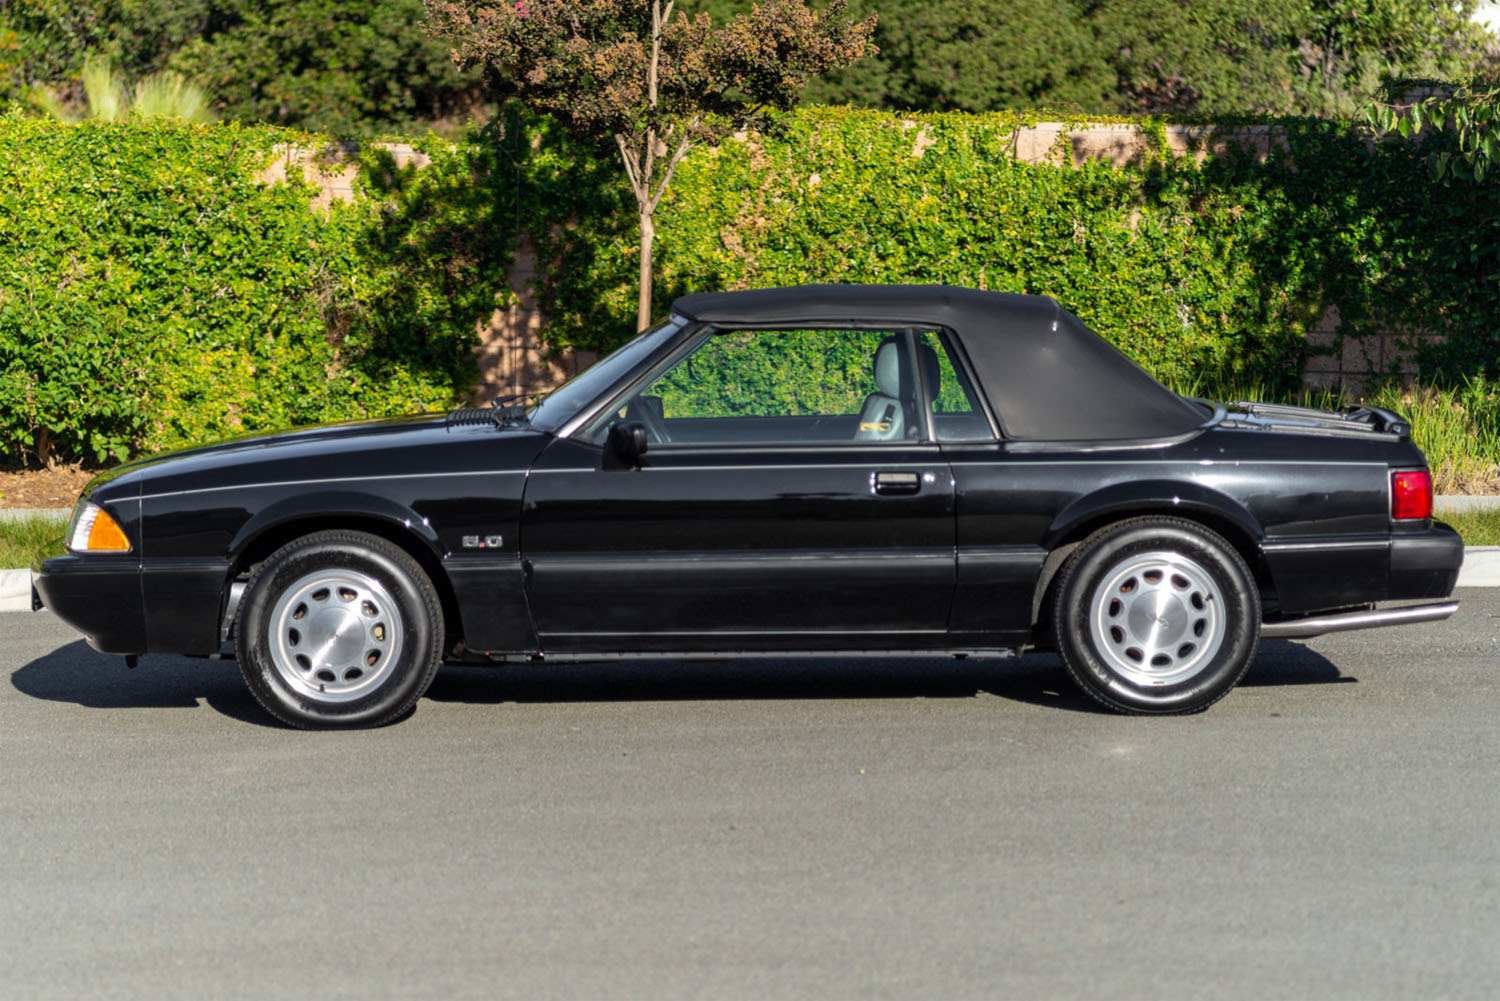 1989 Mustang Lx 5.0 Convertible For Sale